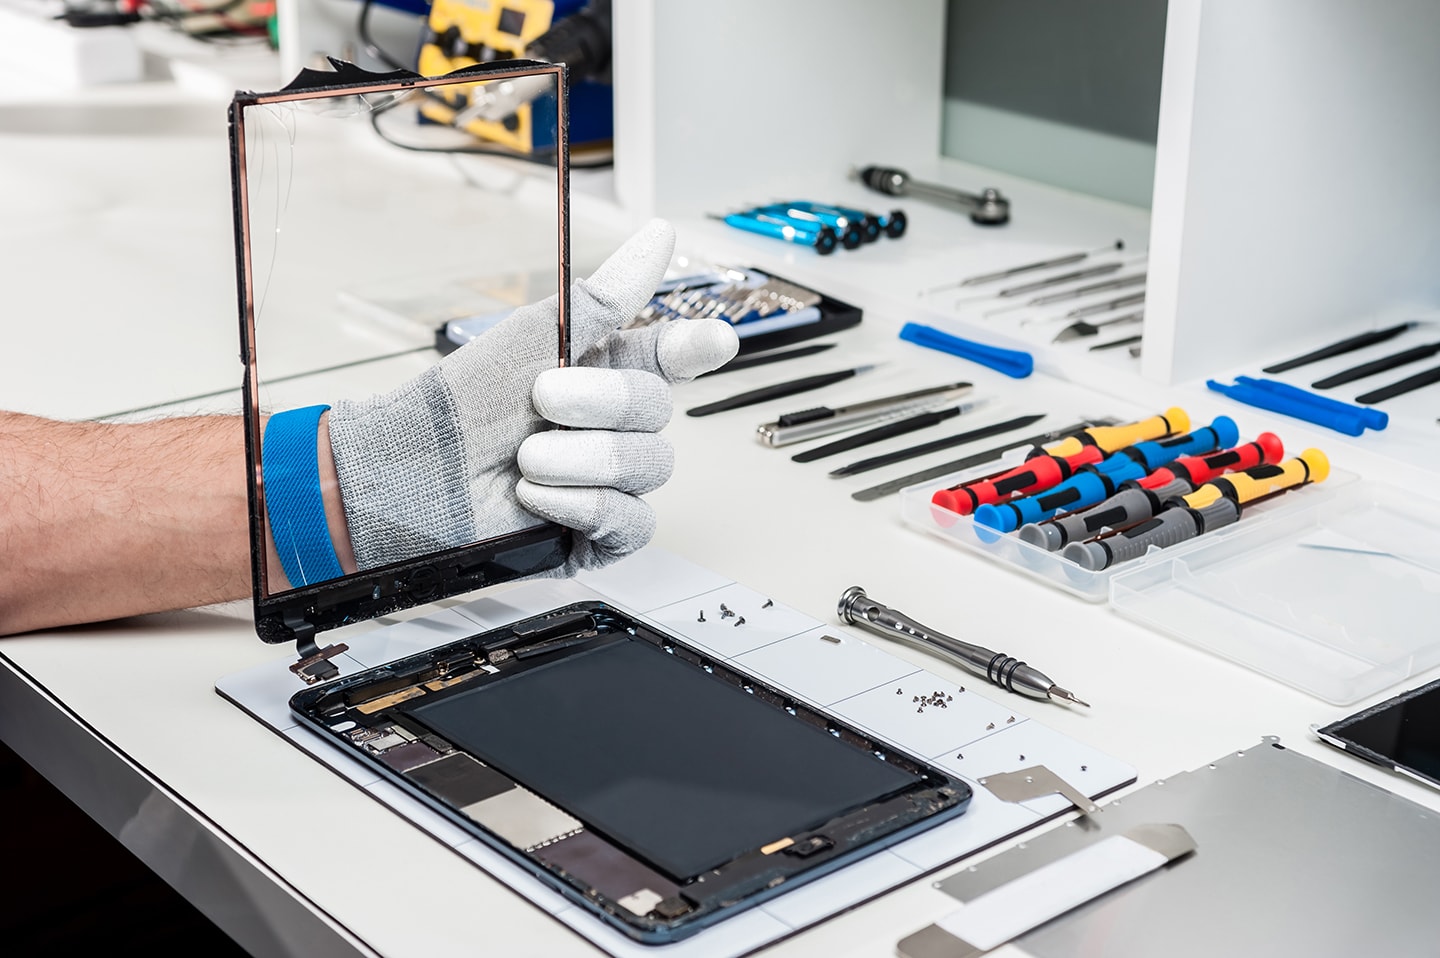 iPad Repairs Near Me Quality Service with Entire Tech